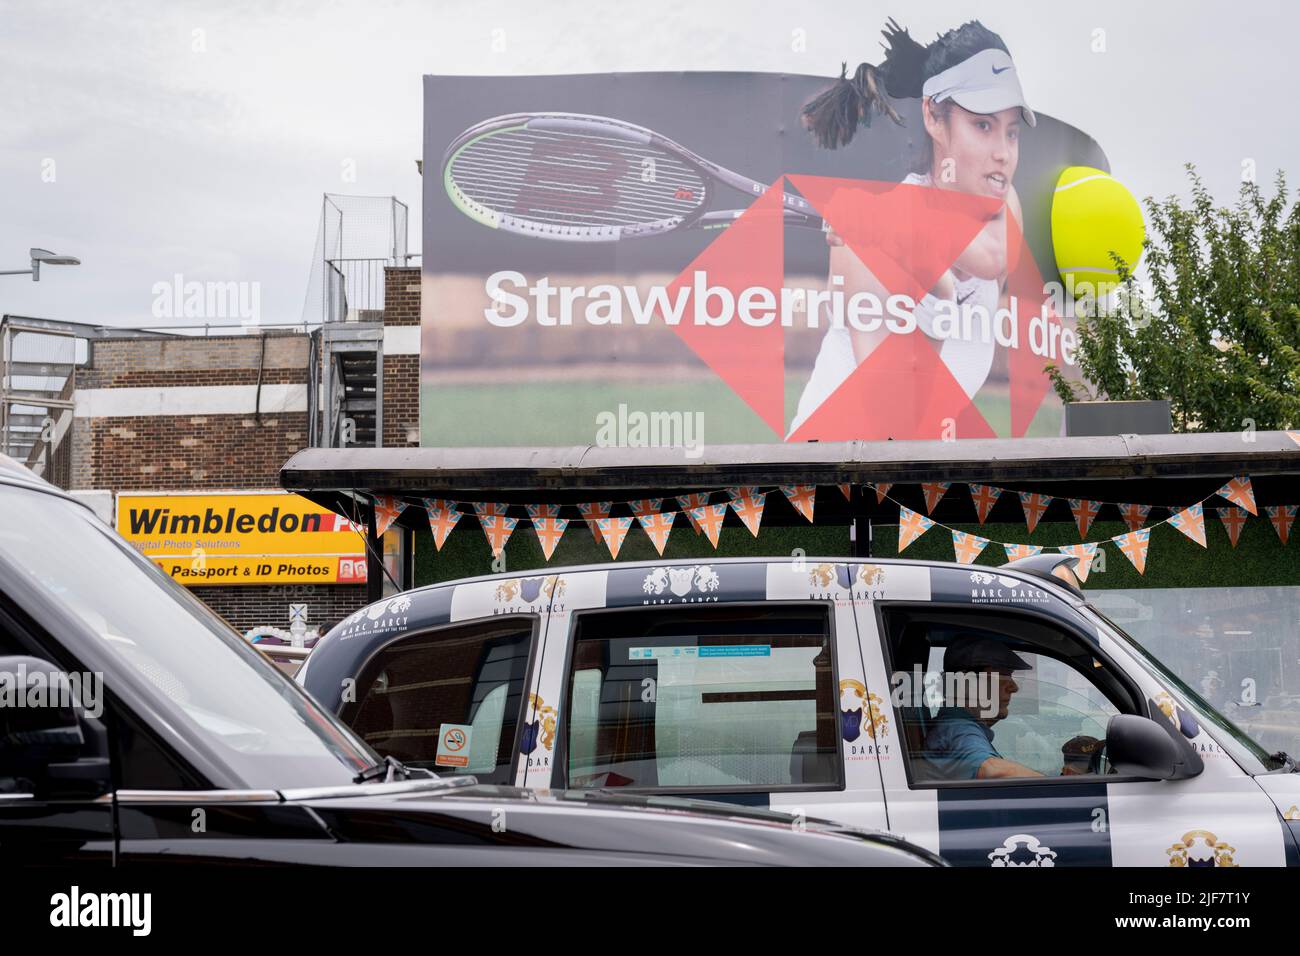 British tennis player, Emma Raducanu who is sponsored by HSBC appears on a giant billboard in Wimbledon town centre, during the first week of competition of the Wimbledon Lawn Tennis Association championships, on 30th June 2022, in London, England. Raducanu, whose parents both work in the financial industry, already has sponsorship deals with Porsche, Tiffany and Co, British Airways, Evian, Dior and Vodafone. HSBC is also a major Wimbledon sponsor but a UK parliamentarian group has called on Wimbledon to drop the brand over the bank’s support of the controversial national security law in Hong Stock Photo